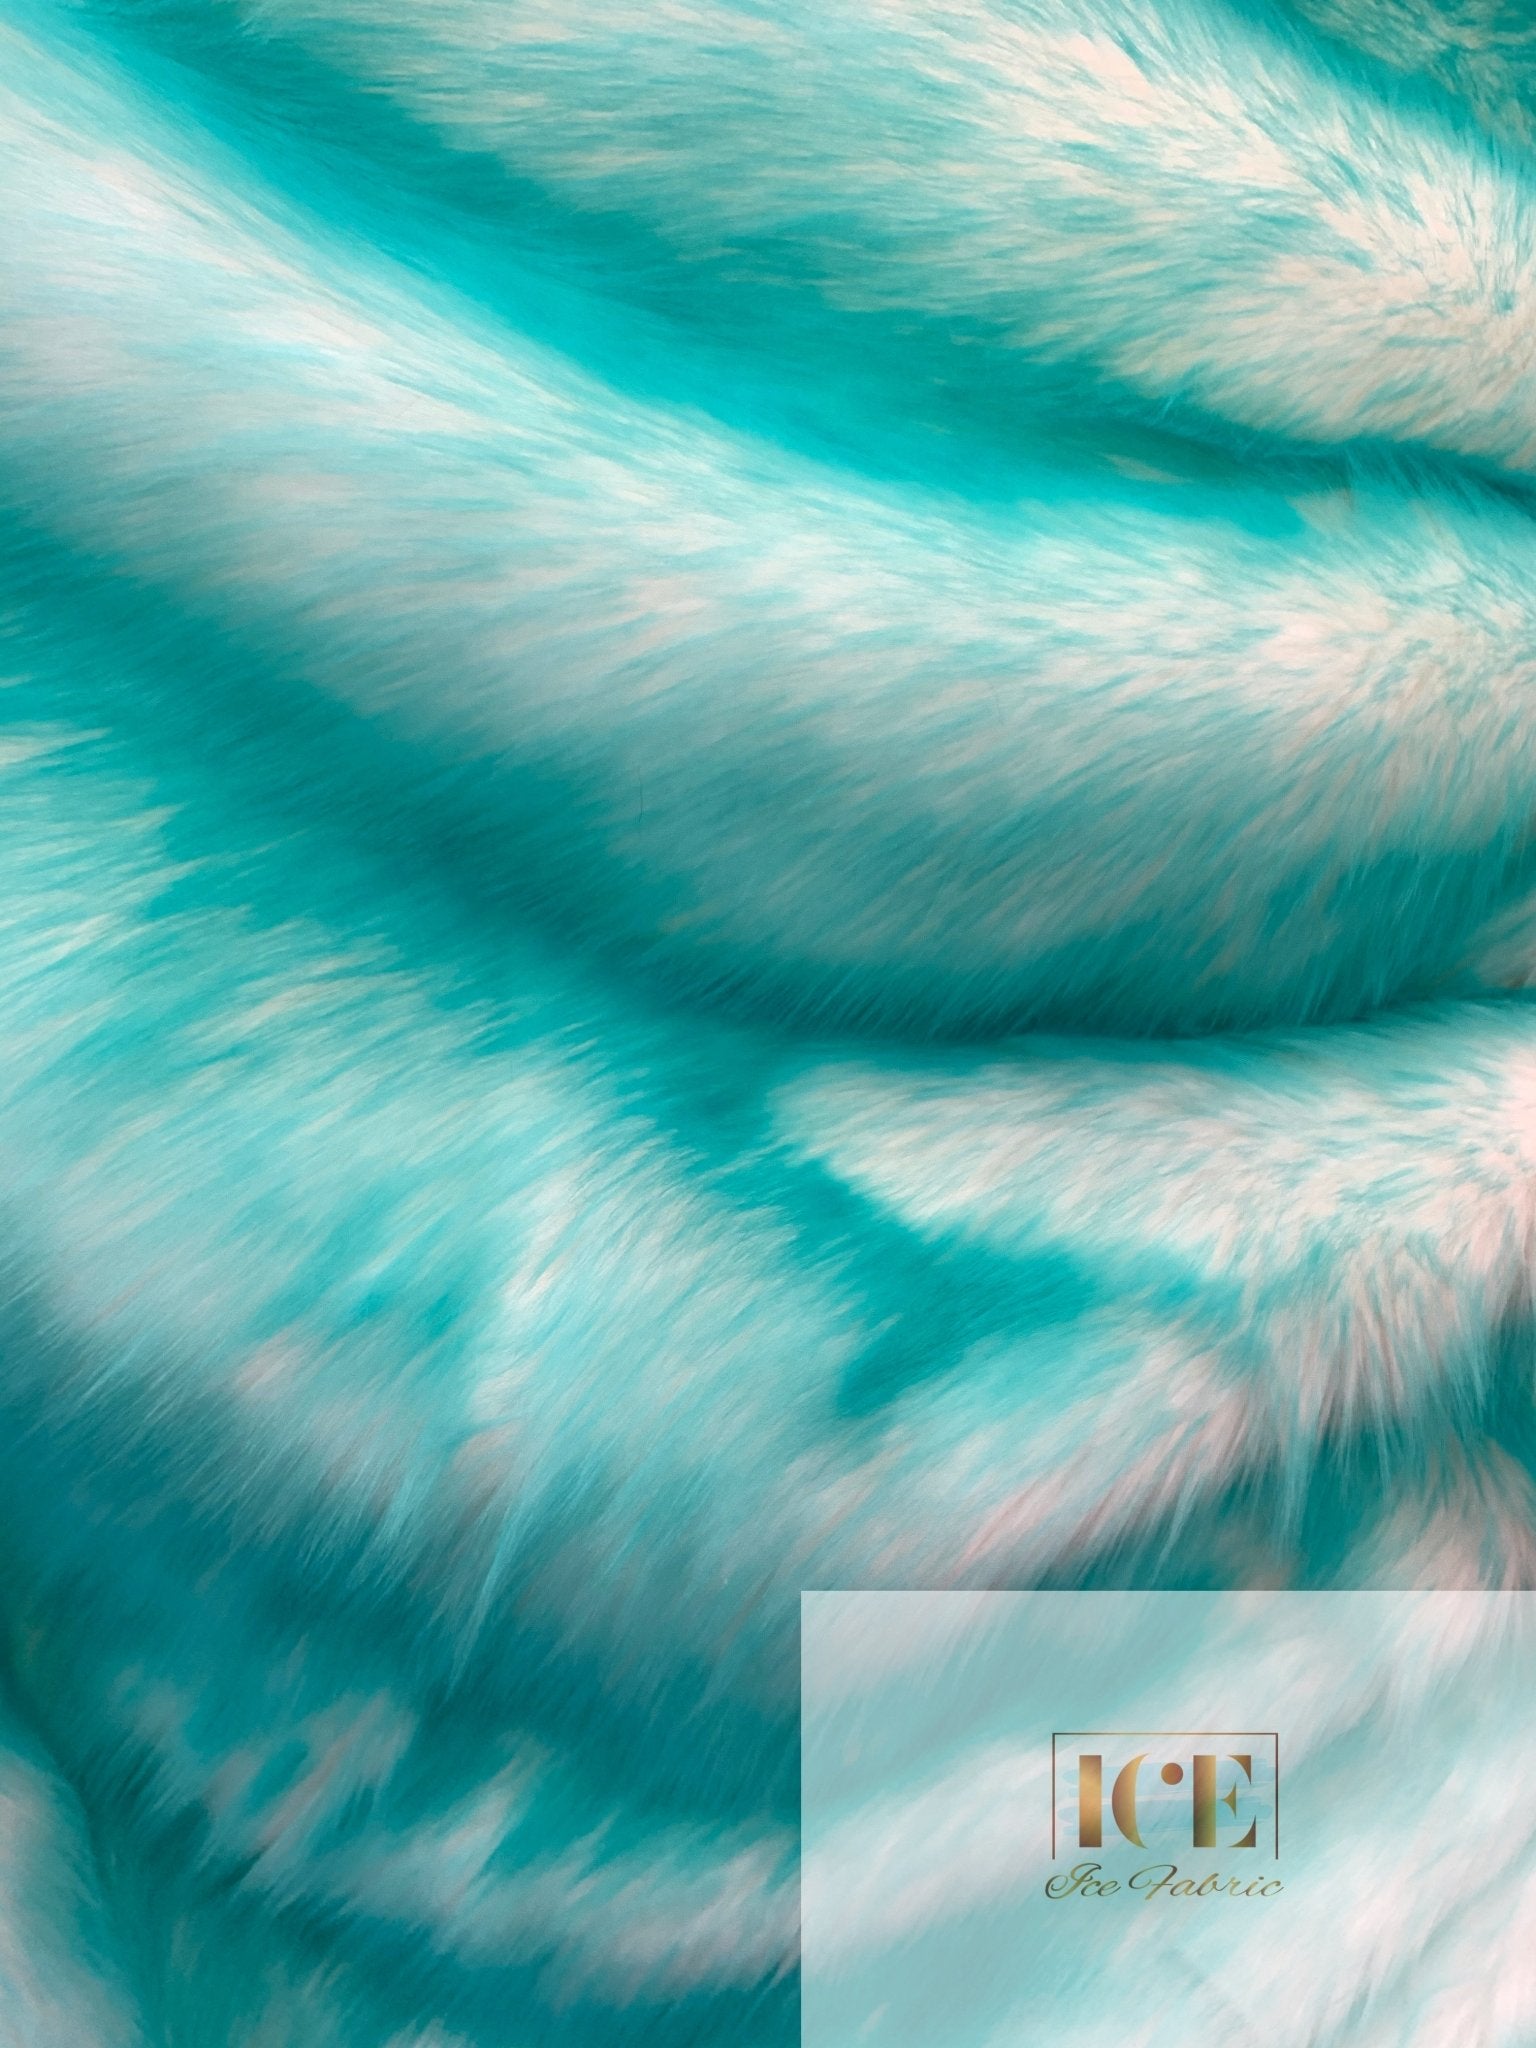 Canadian Fox 2 Tone Shaggy Long Pile Faux Fur Fabric For Blankets, Costumes, Bed SpreadICEFABRICICE FABRICSAquaBy The Yard (60 inches Wide)Canadian Fox 2 Tone Shaggy Long Pile Faux Fur Fabric For Blankets, Costumes, Bed Spread ICEFABRIC Aqua